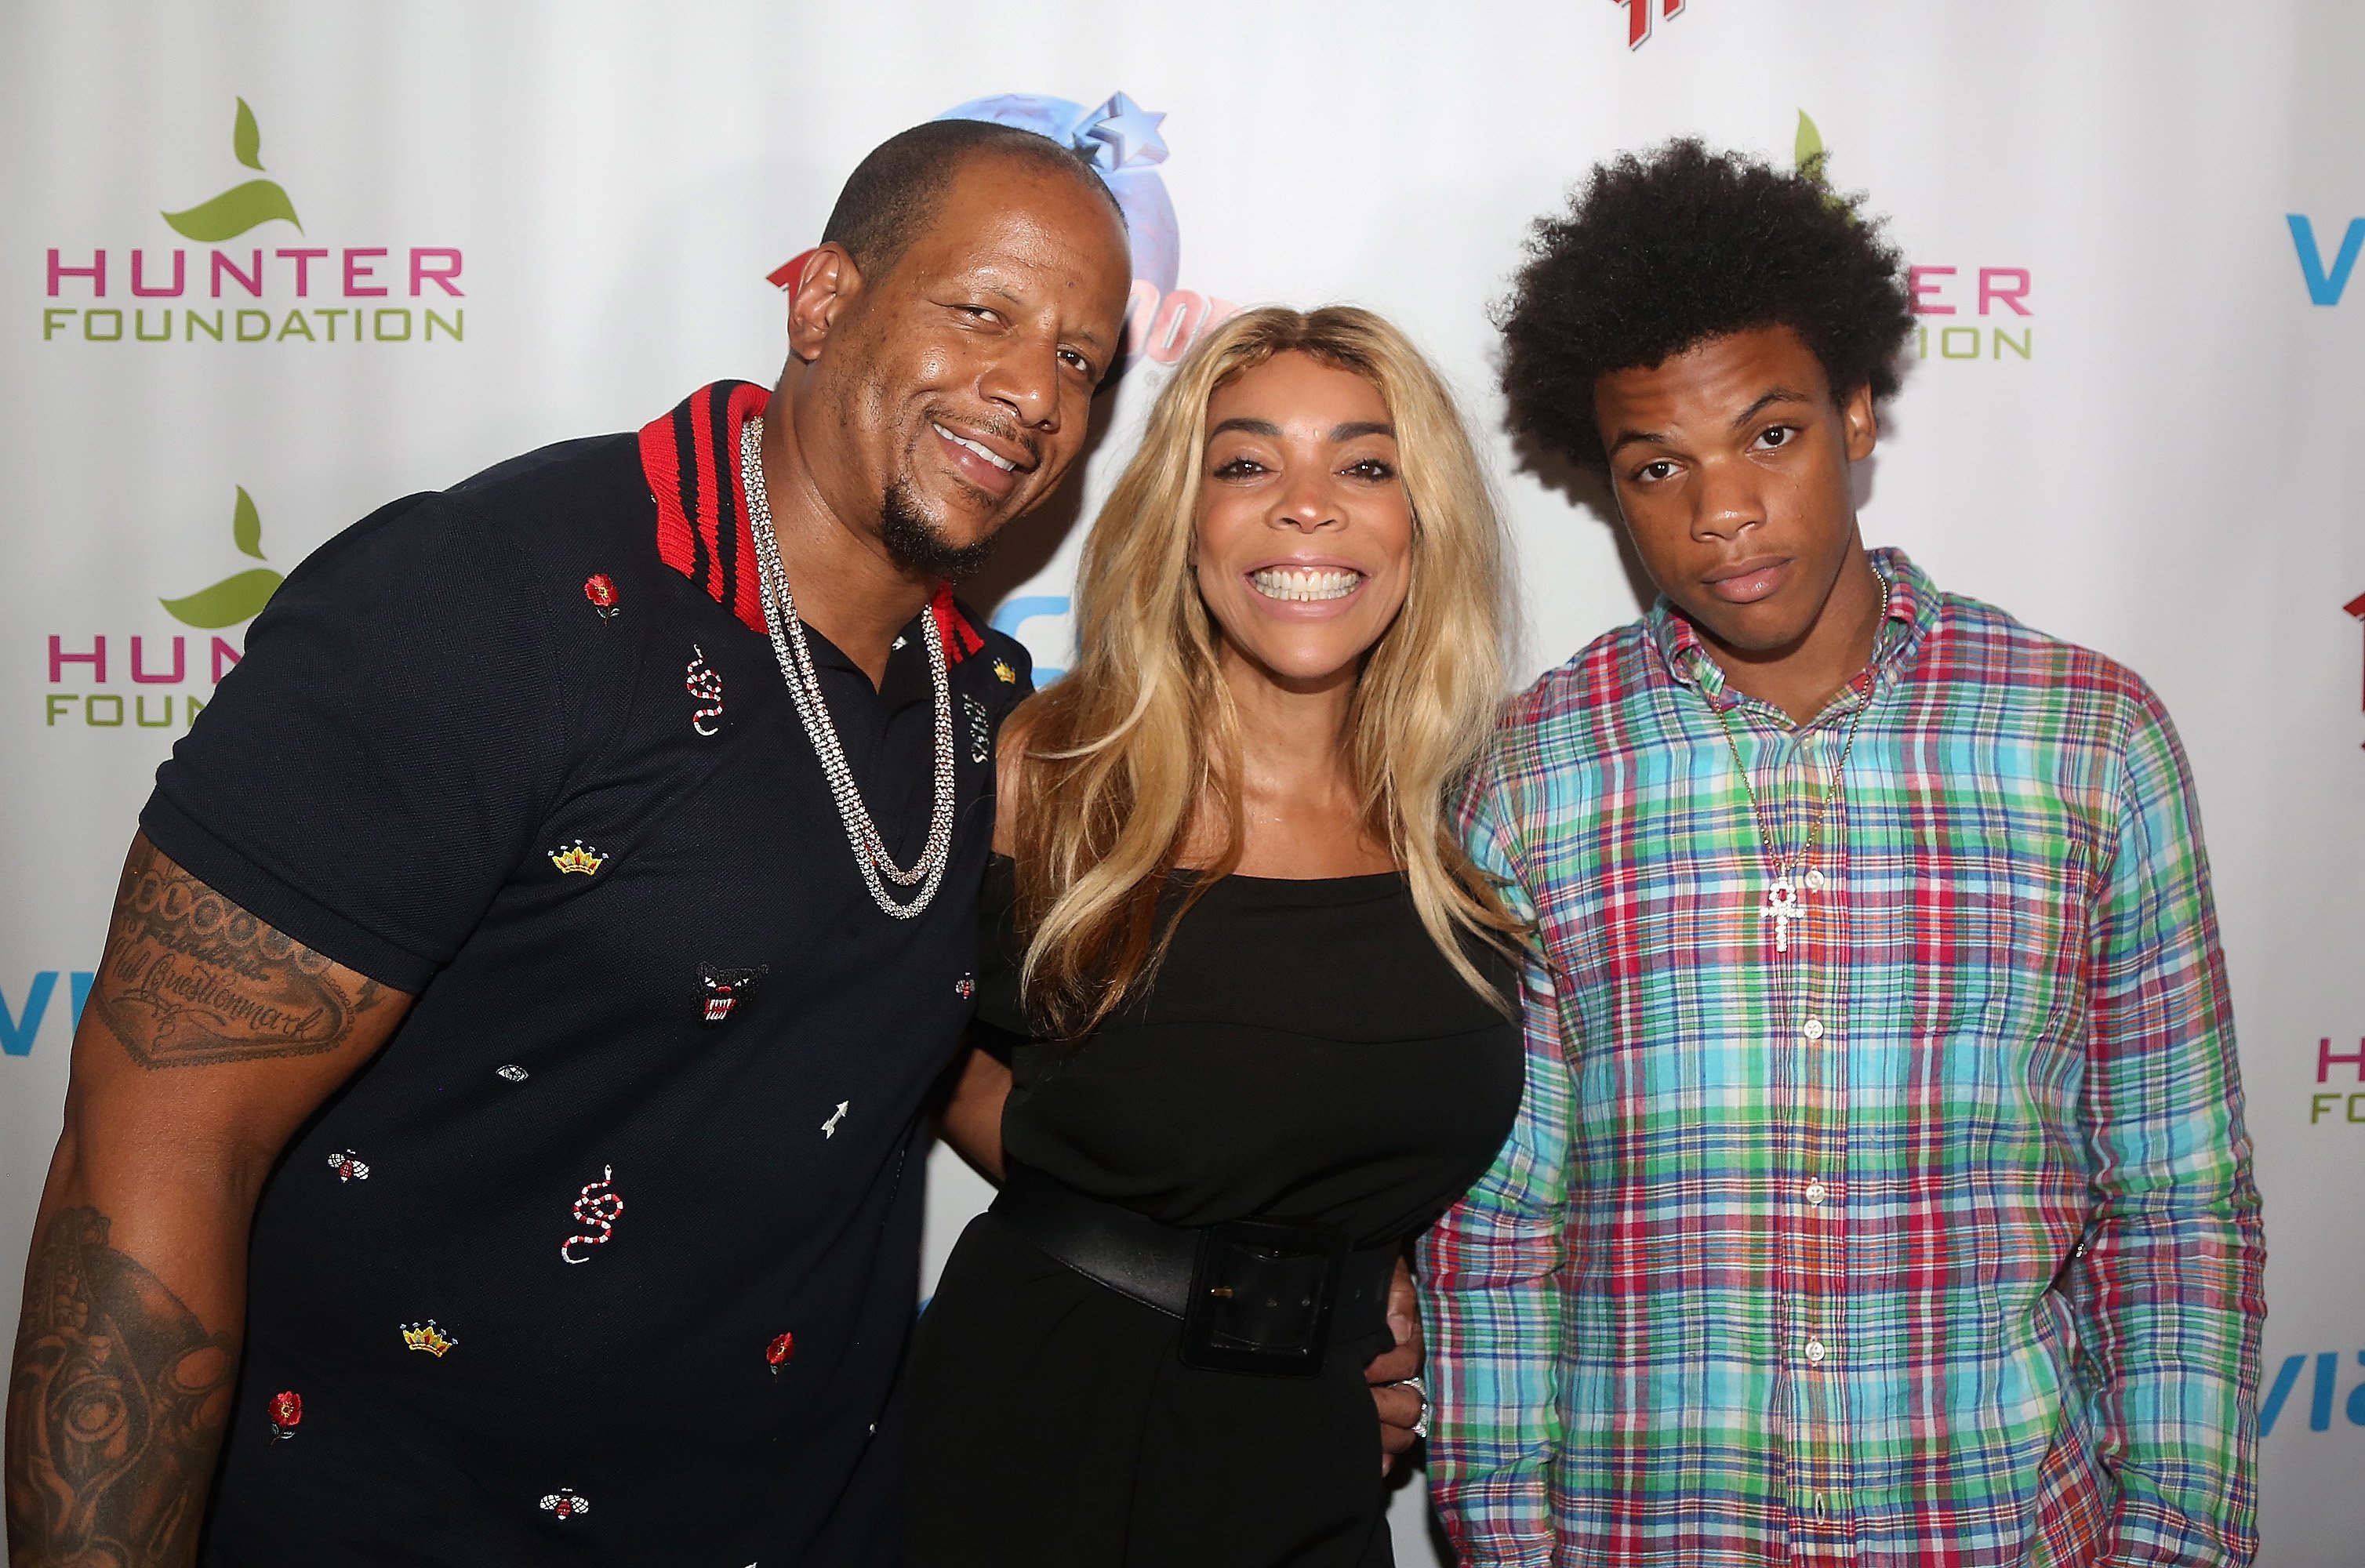 Kevin Hunter, Wendy Williams & Kevin Hunter Jr. at Planet Hollywood Times Square in New York City on July 11, 2017 | Photo: Getty Images